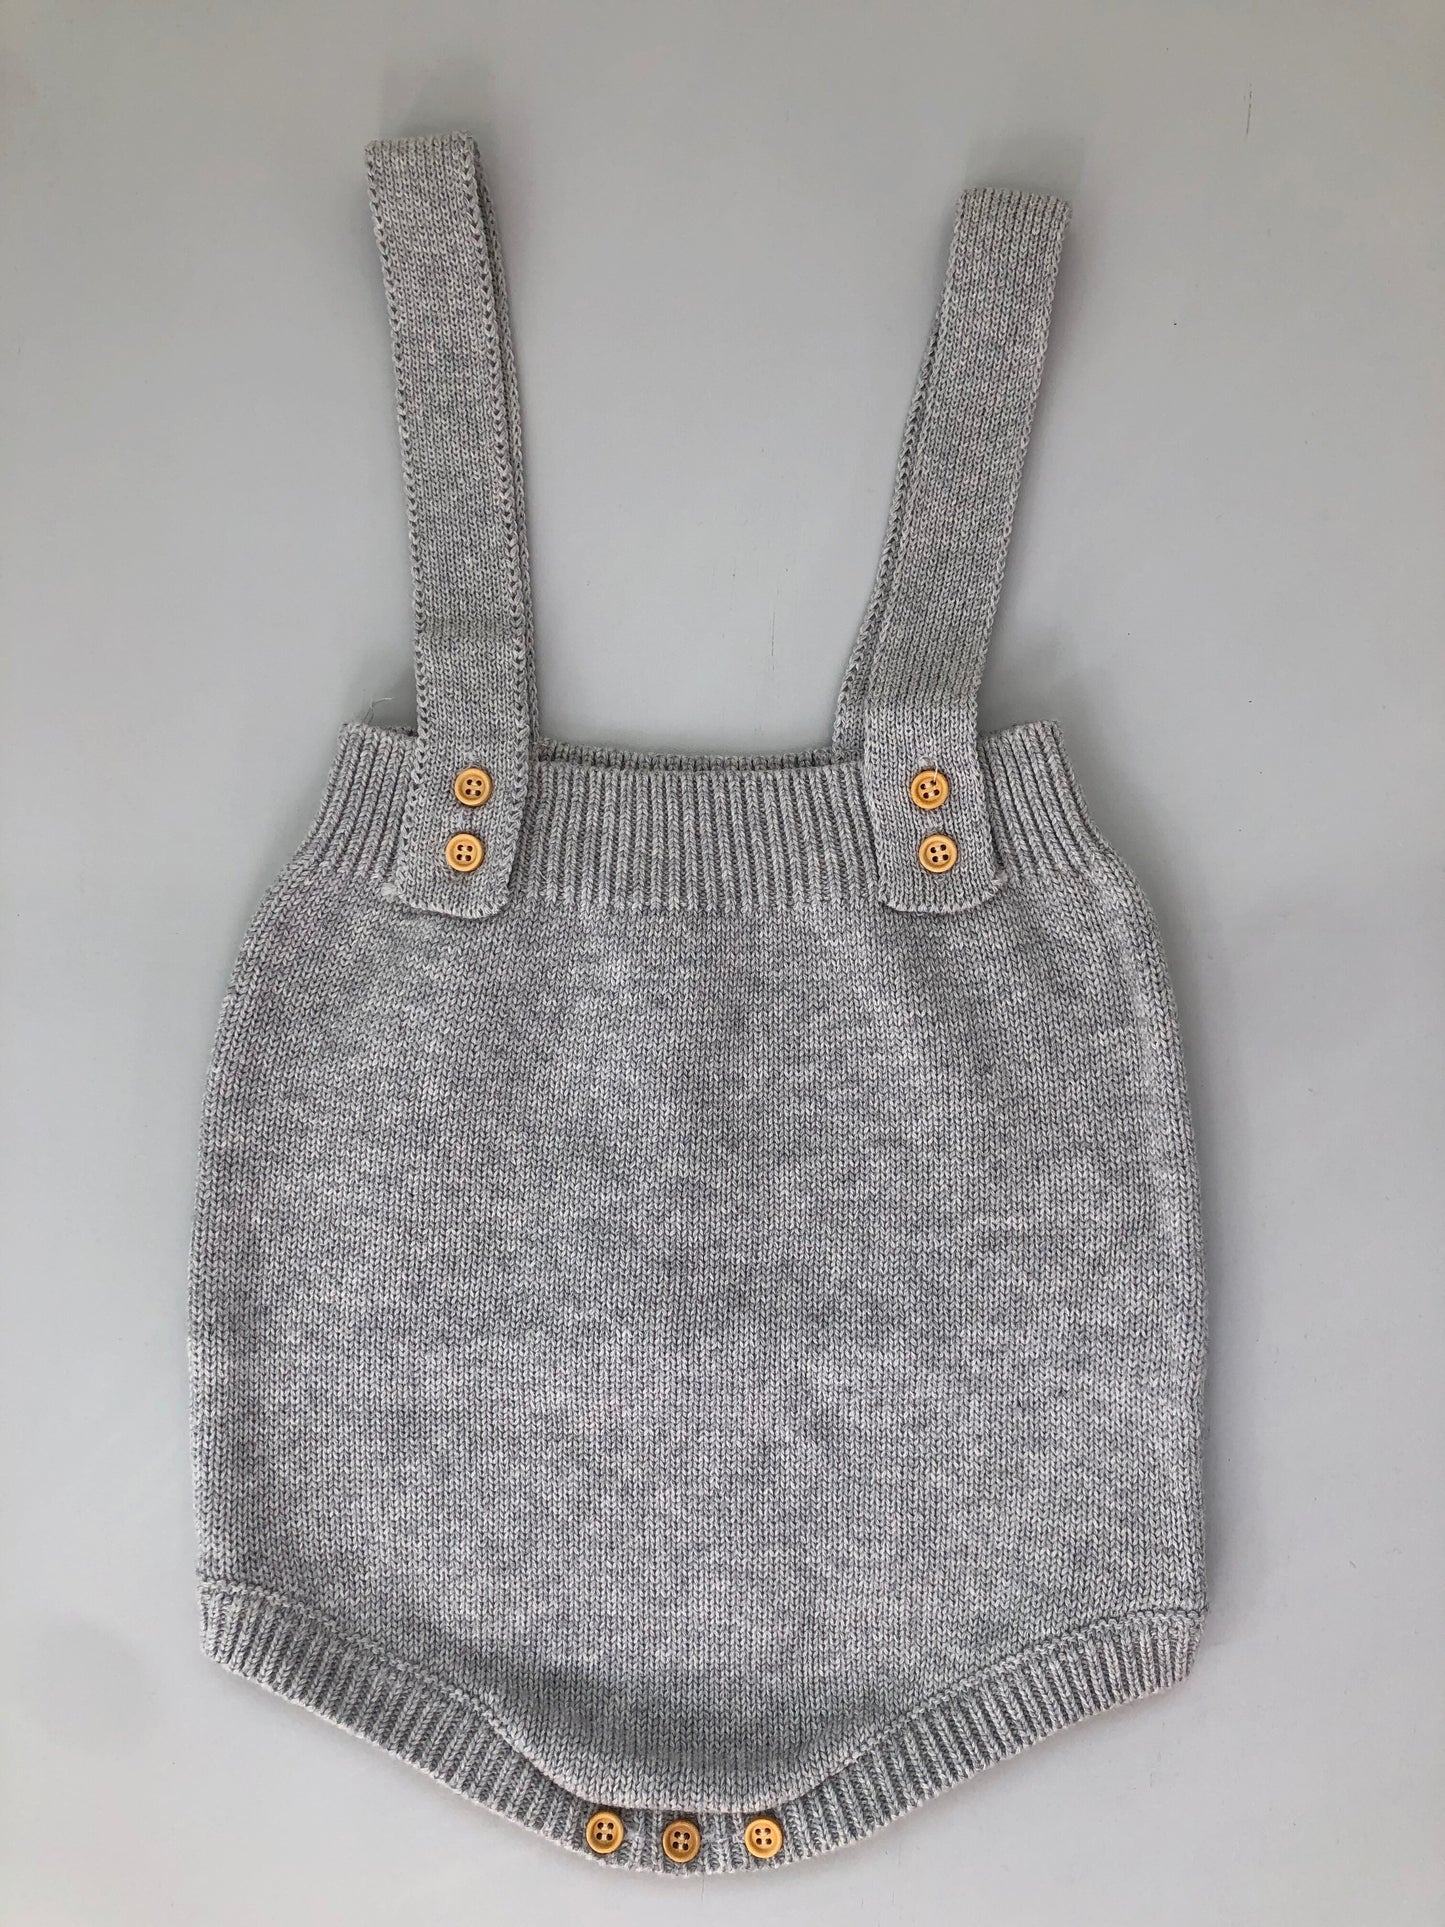 Spring Knit Overalls